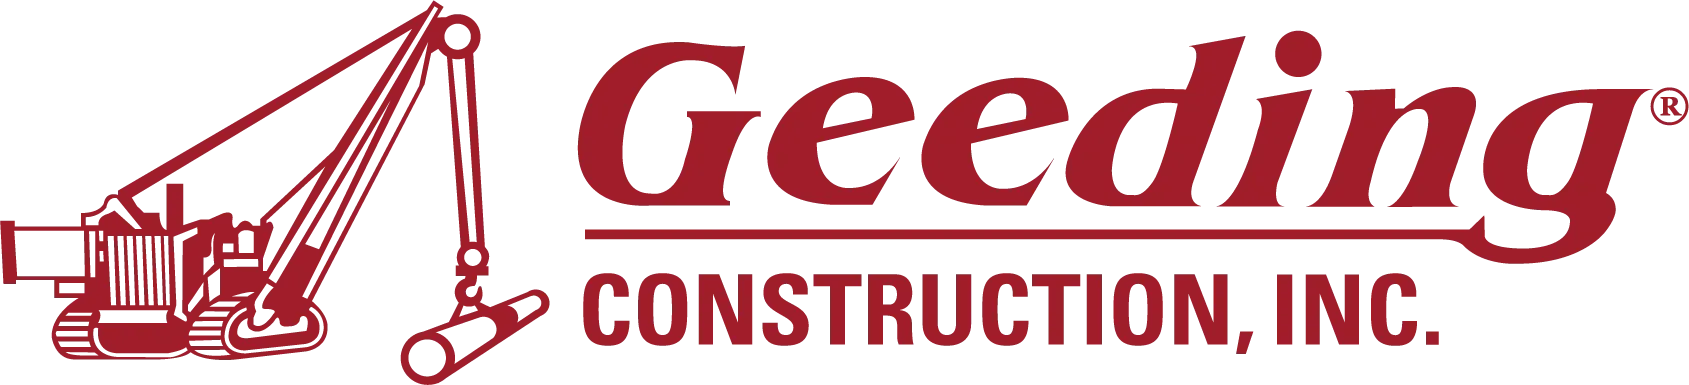 A red and black logo for the free construction company.